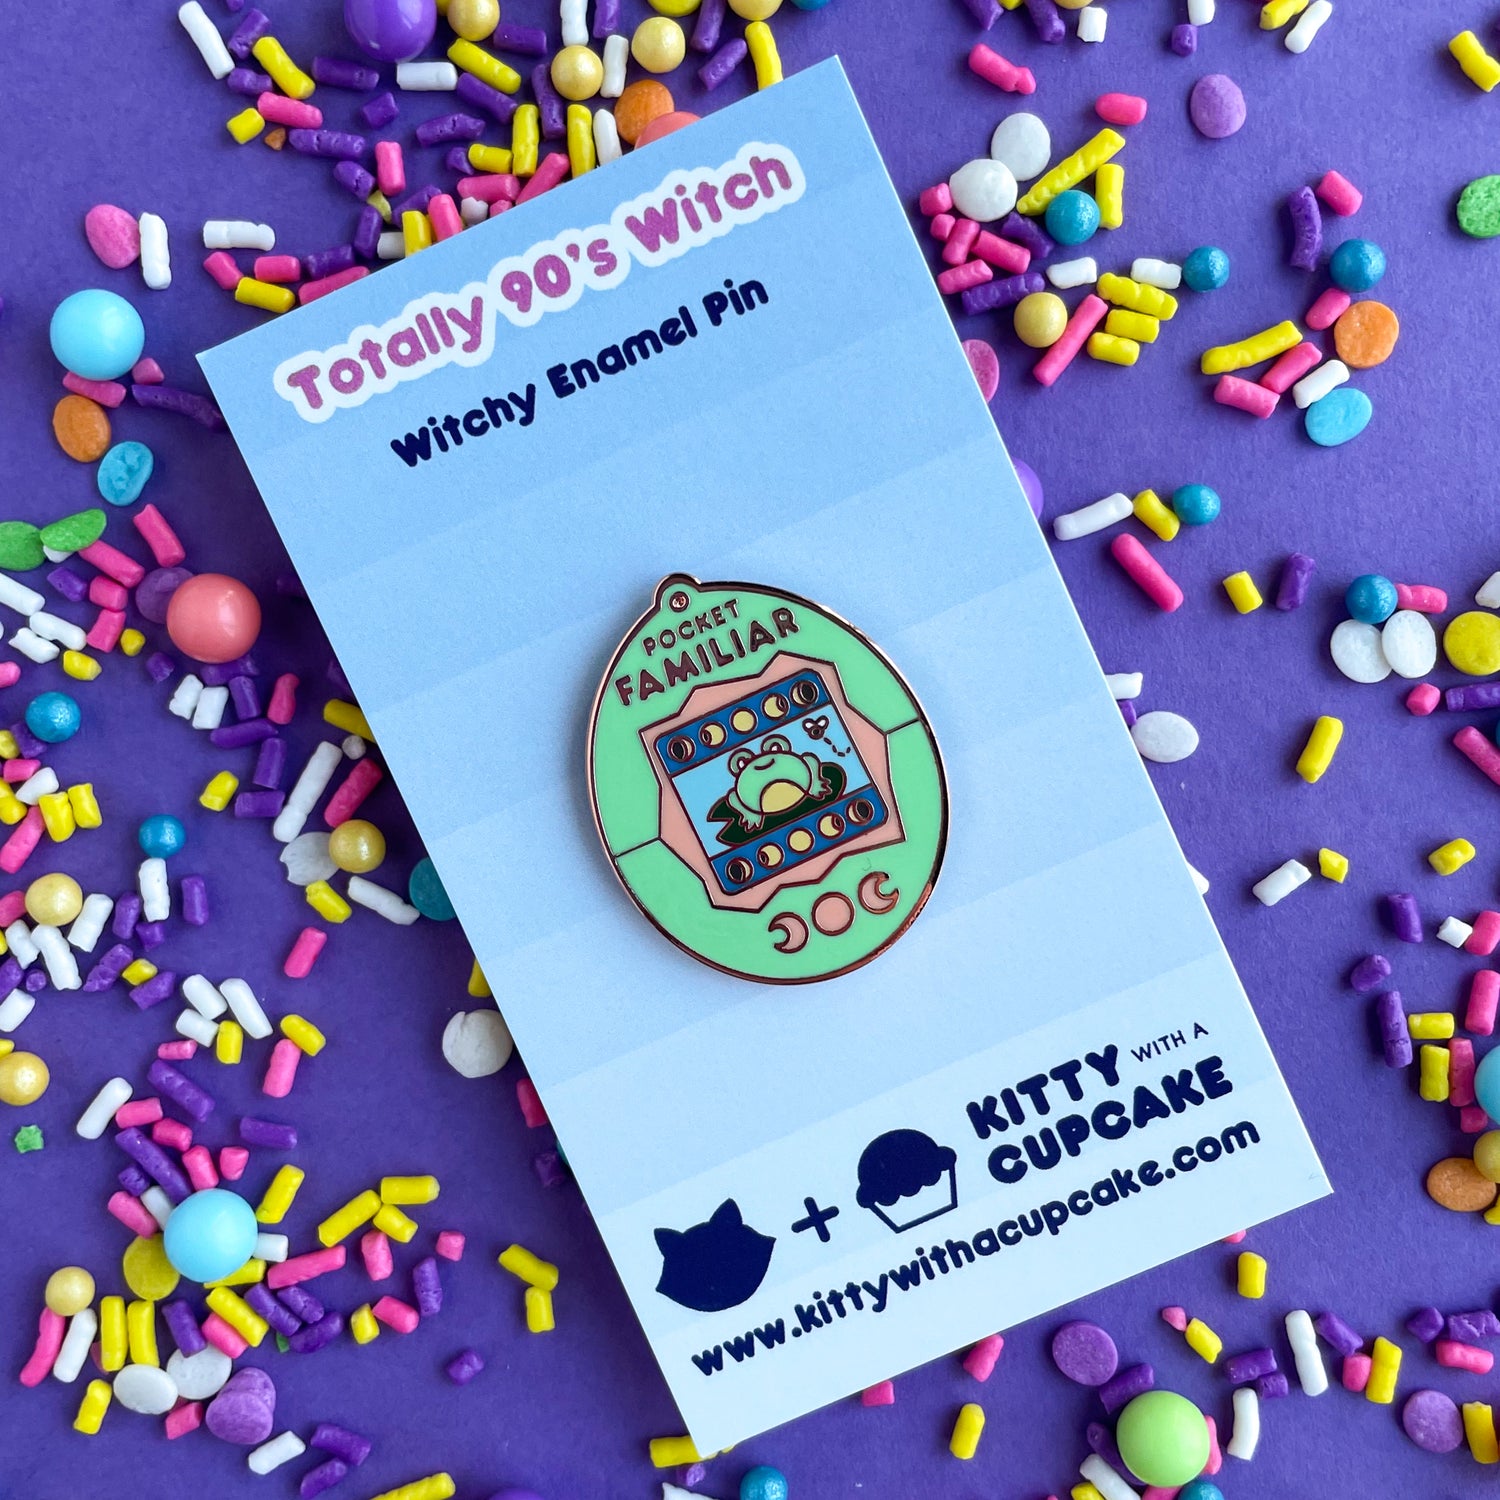 An enamel pin shaped like a Tamagotchi that reads "Pocket Familiar" at the top. It has a mint green and peach shell. The screen has moon phases and a frog on a lily pad looking at a fly. The buttons of the tamagotchi are moon phases. The pin is on a blue backing card that reads "Totally 90's Witch". This is on a purple background that is covered in pastel sprinkles.